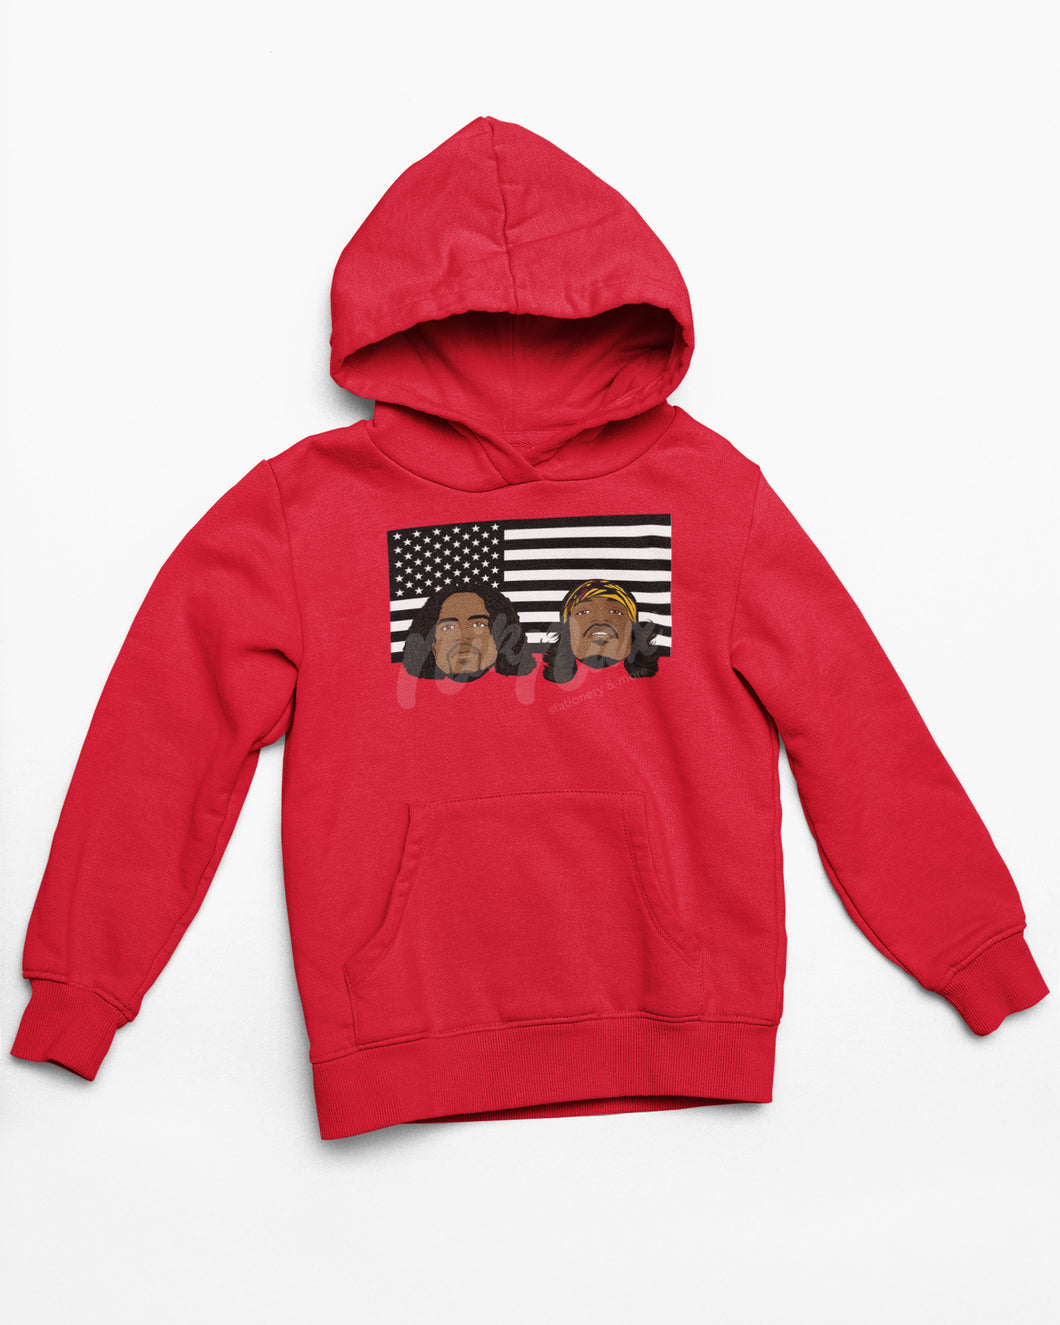 U.S.O. HOODIE (MULTIPLE COLORS AVAILABLE)